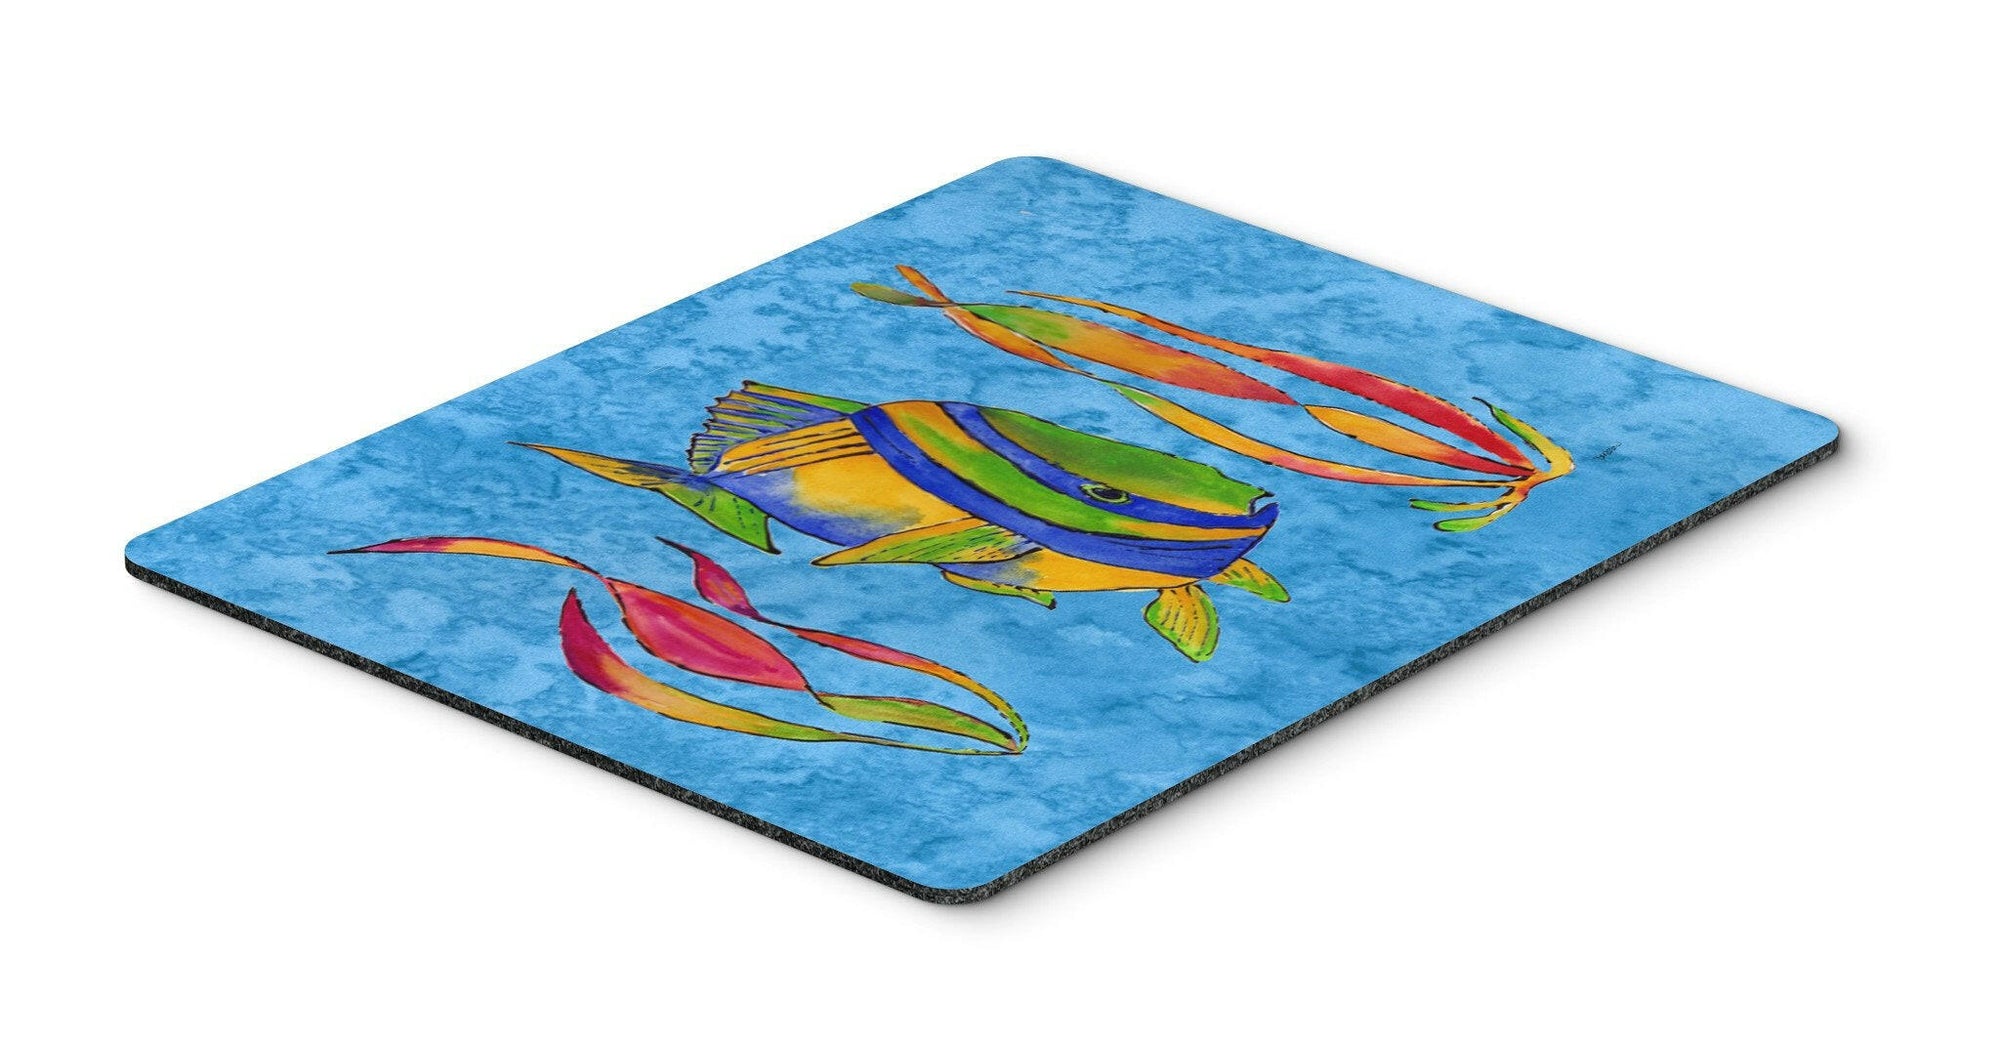 Troical Fish and Seaweed on Blue Mouse Pad, Hot Pad or Trivet 8713MP by Caroline's Treasures